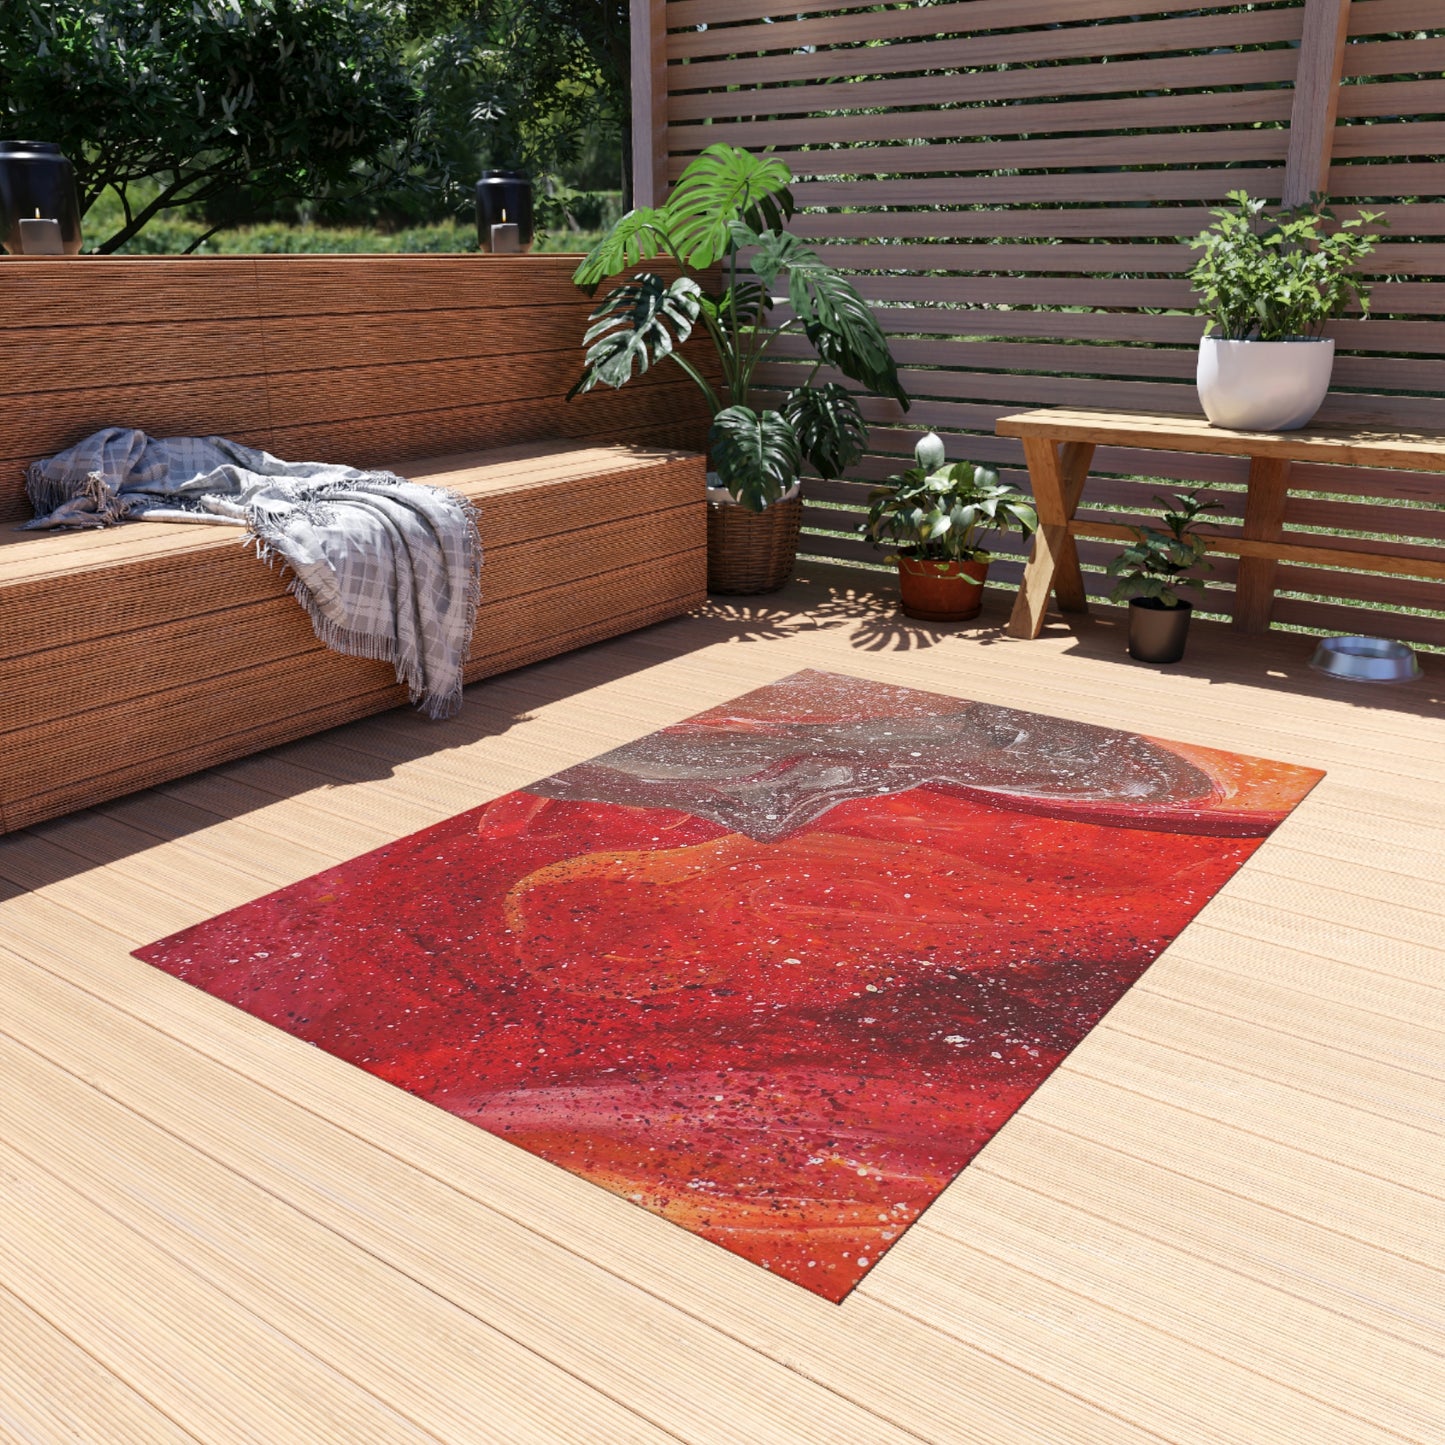 Waves of Creation Painting Outdoor Rug